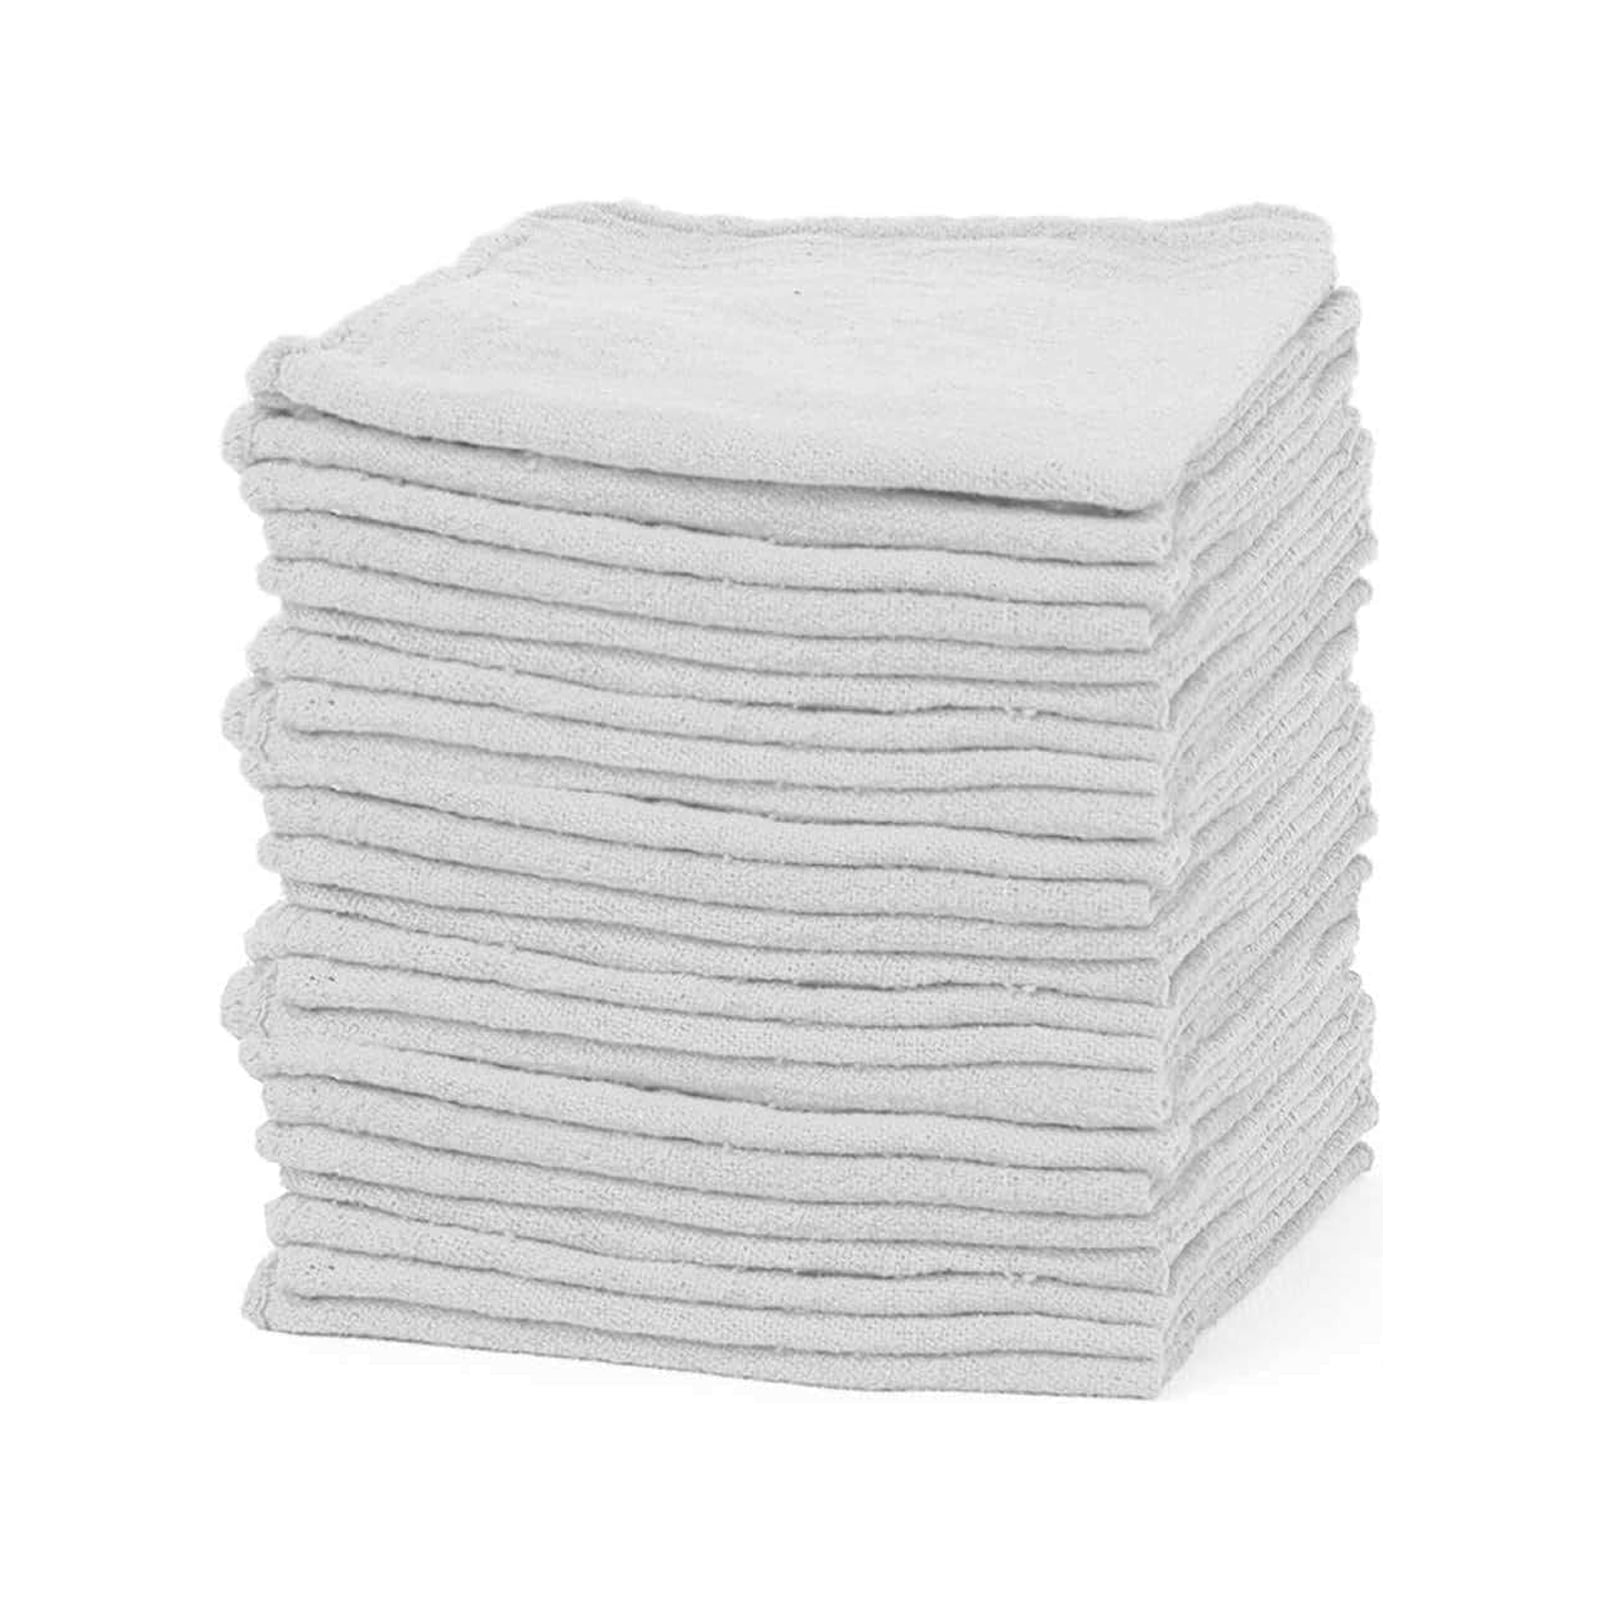 Superio Wash Cloths Cotton Terry Cloth Rags, Hand towels, White Face Spa  Washcloths, General Cleaning 6 Pack 